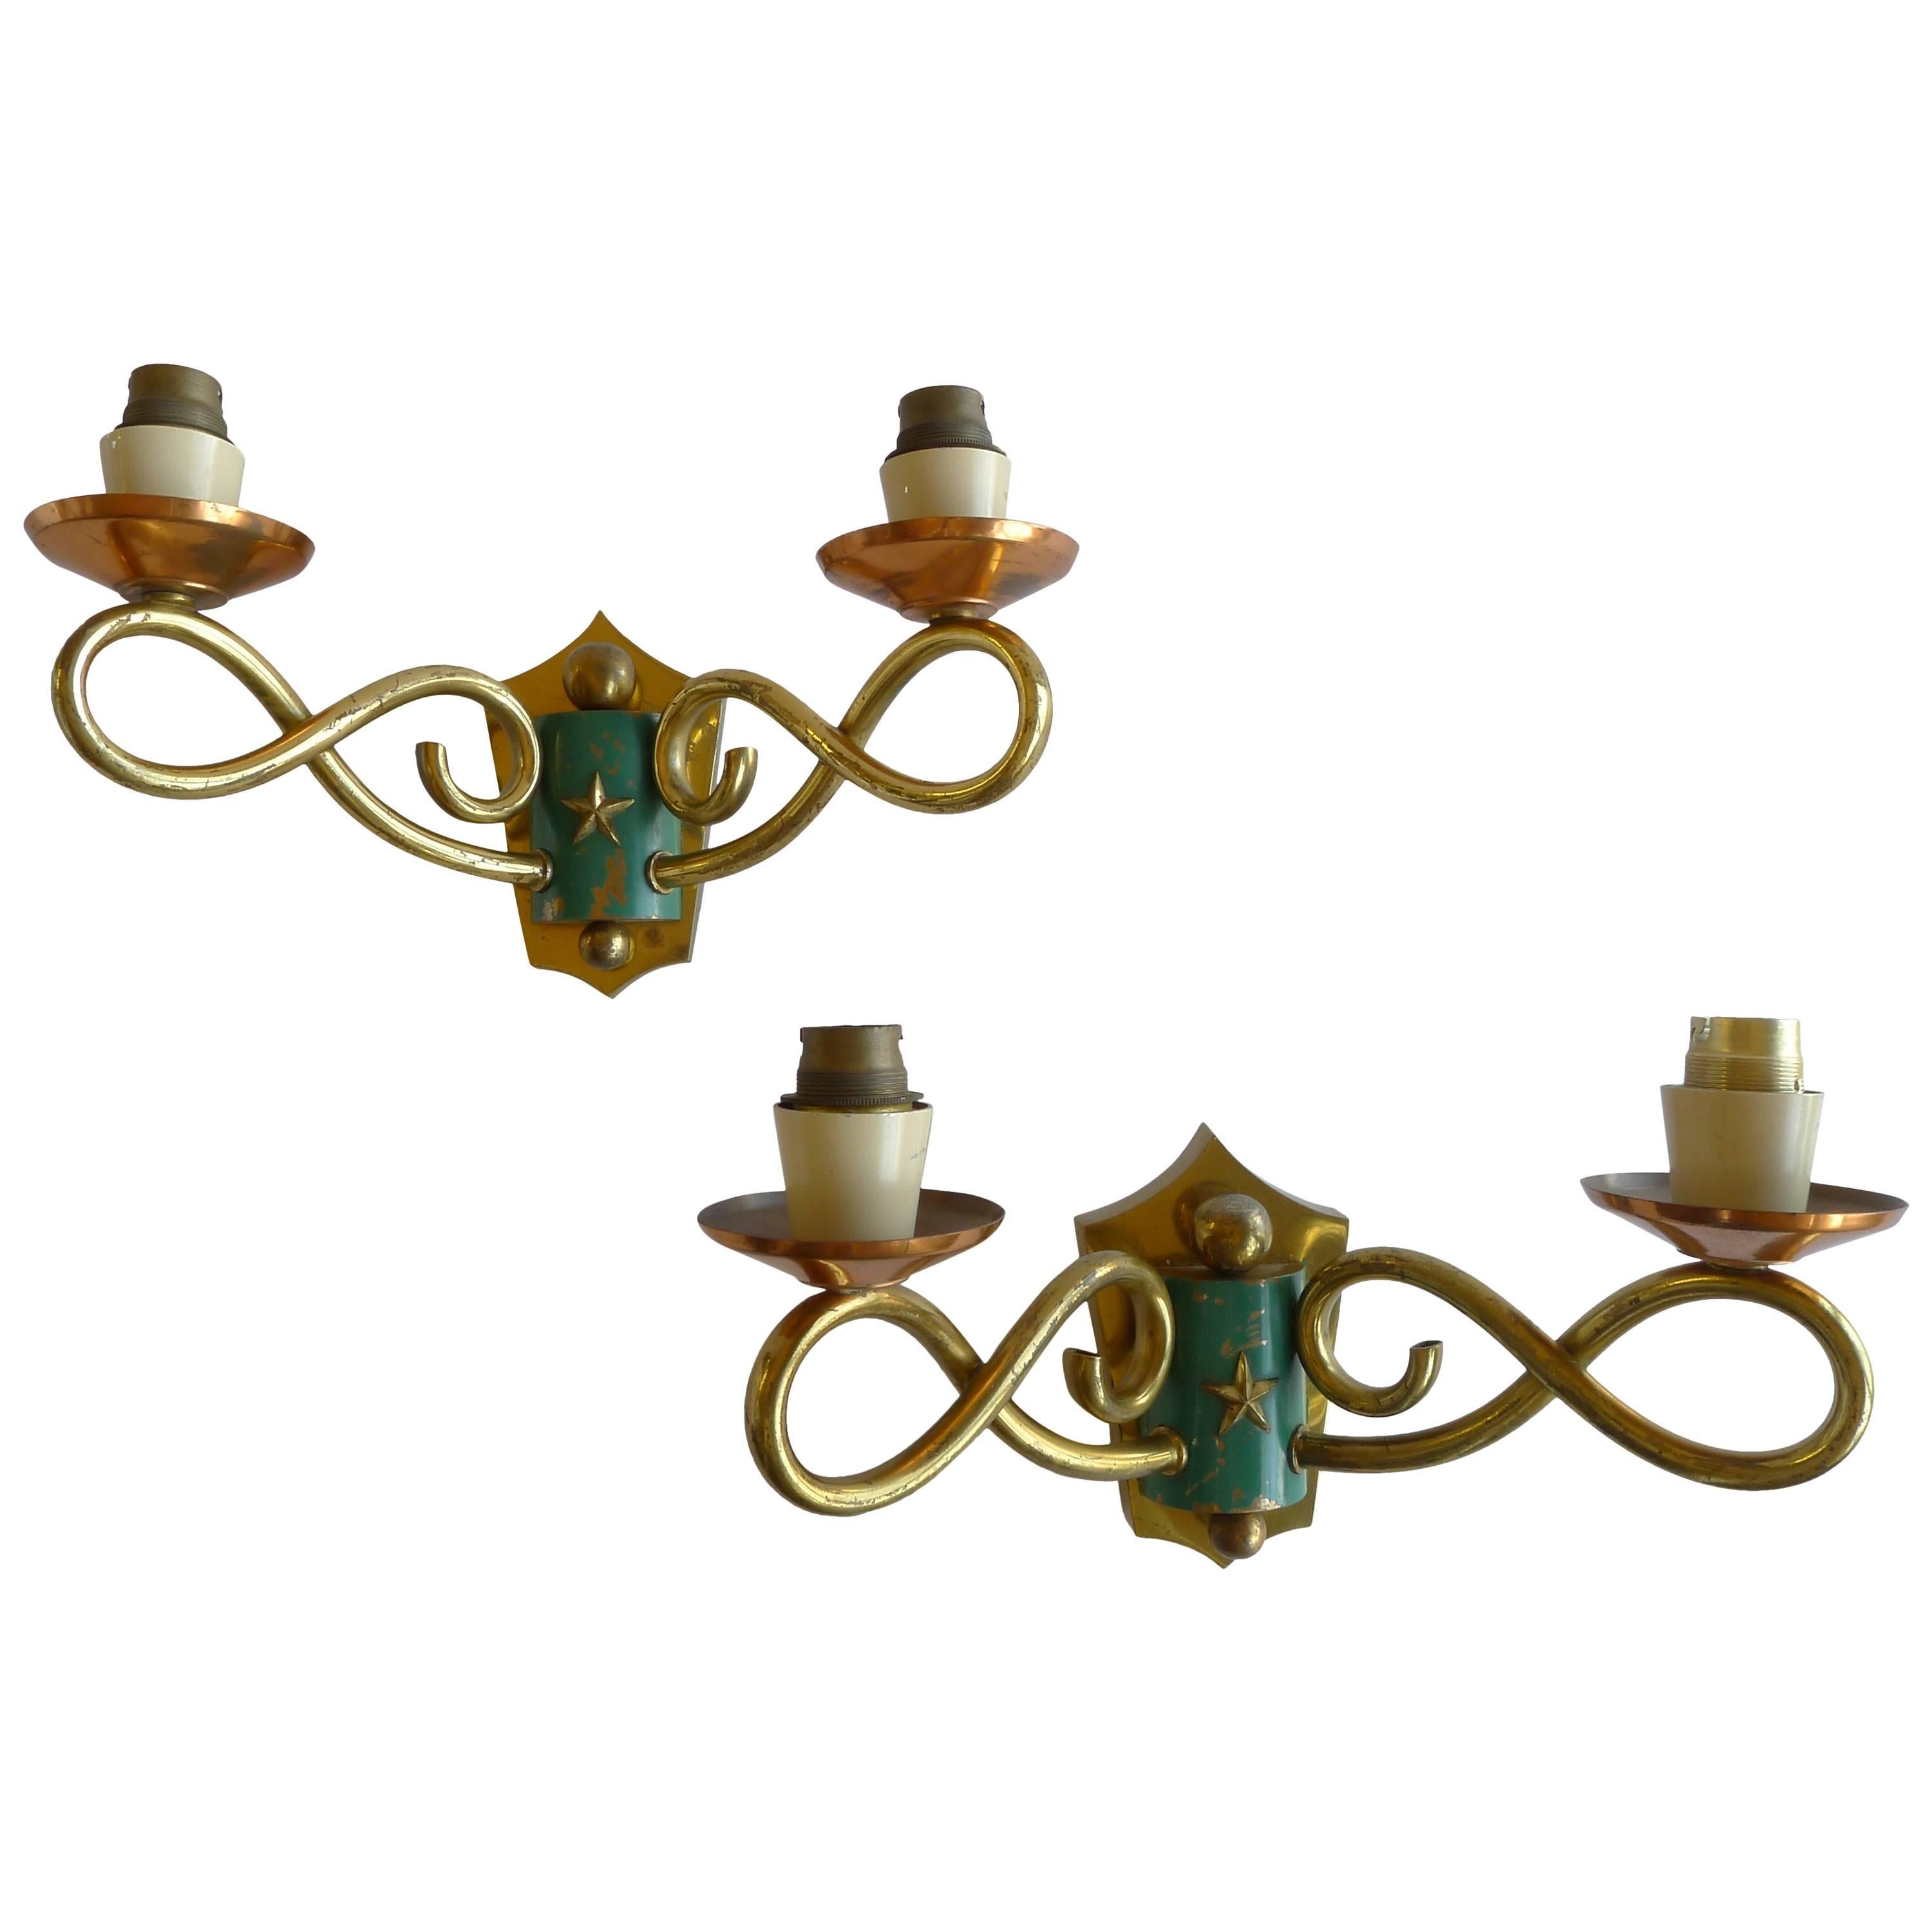 1930s French Regency Wall Sconces in Brass and Copper For Sale